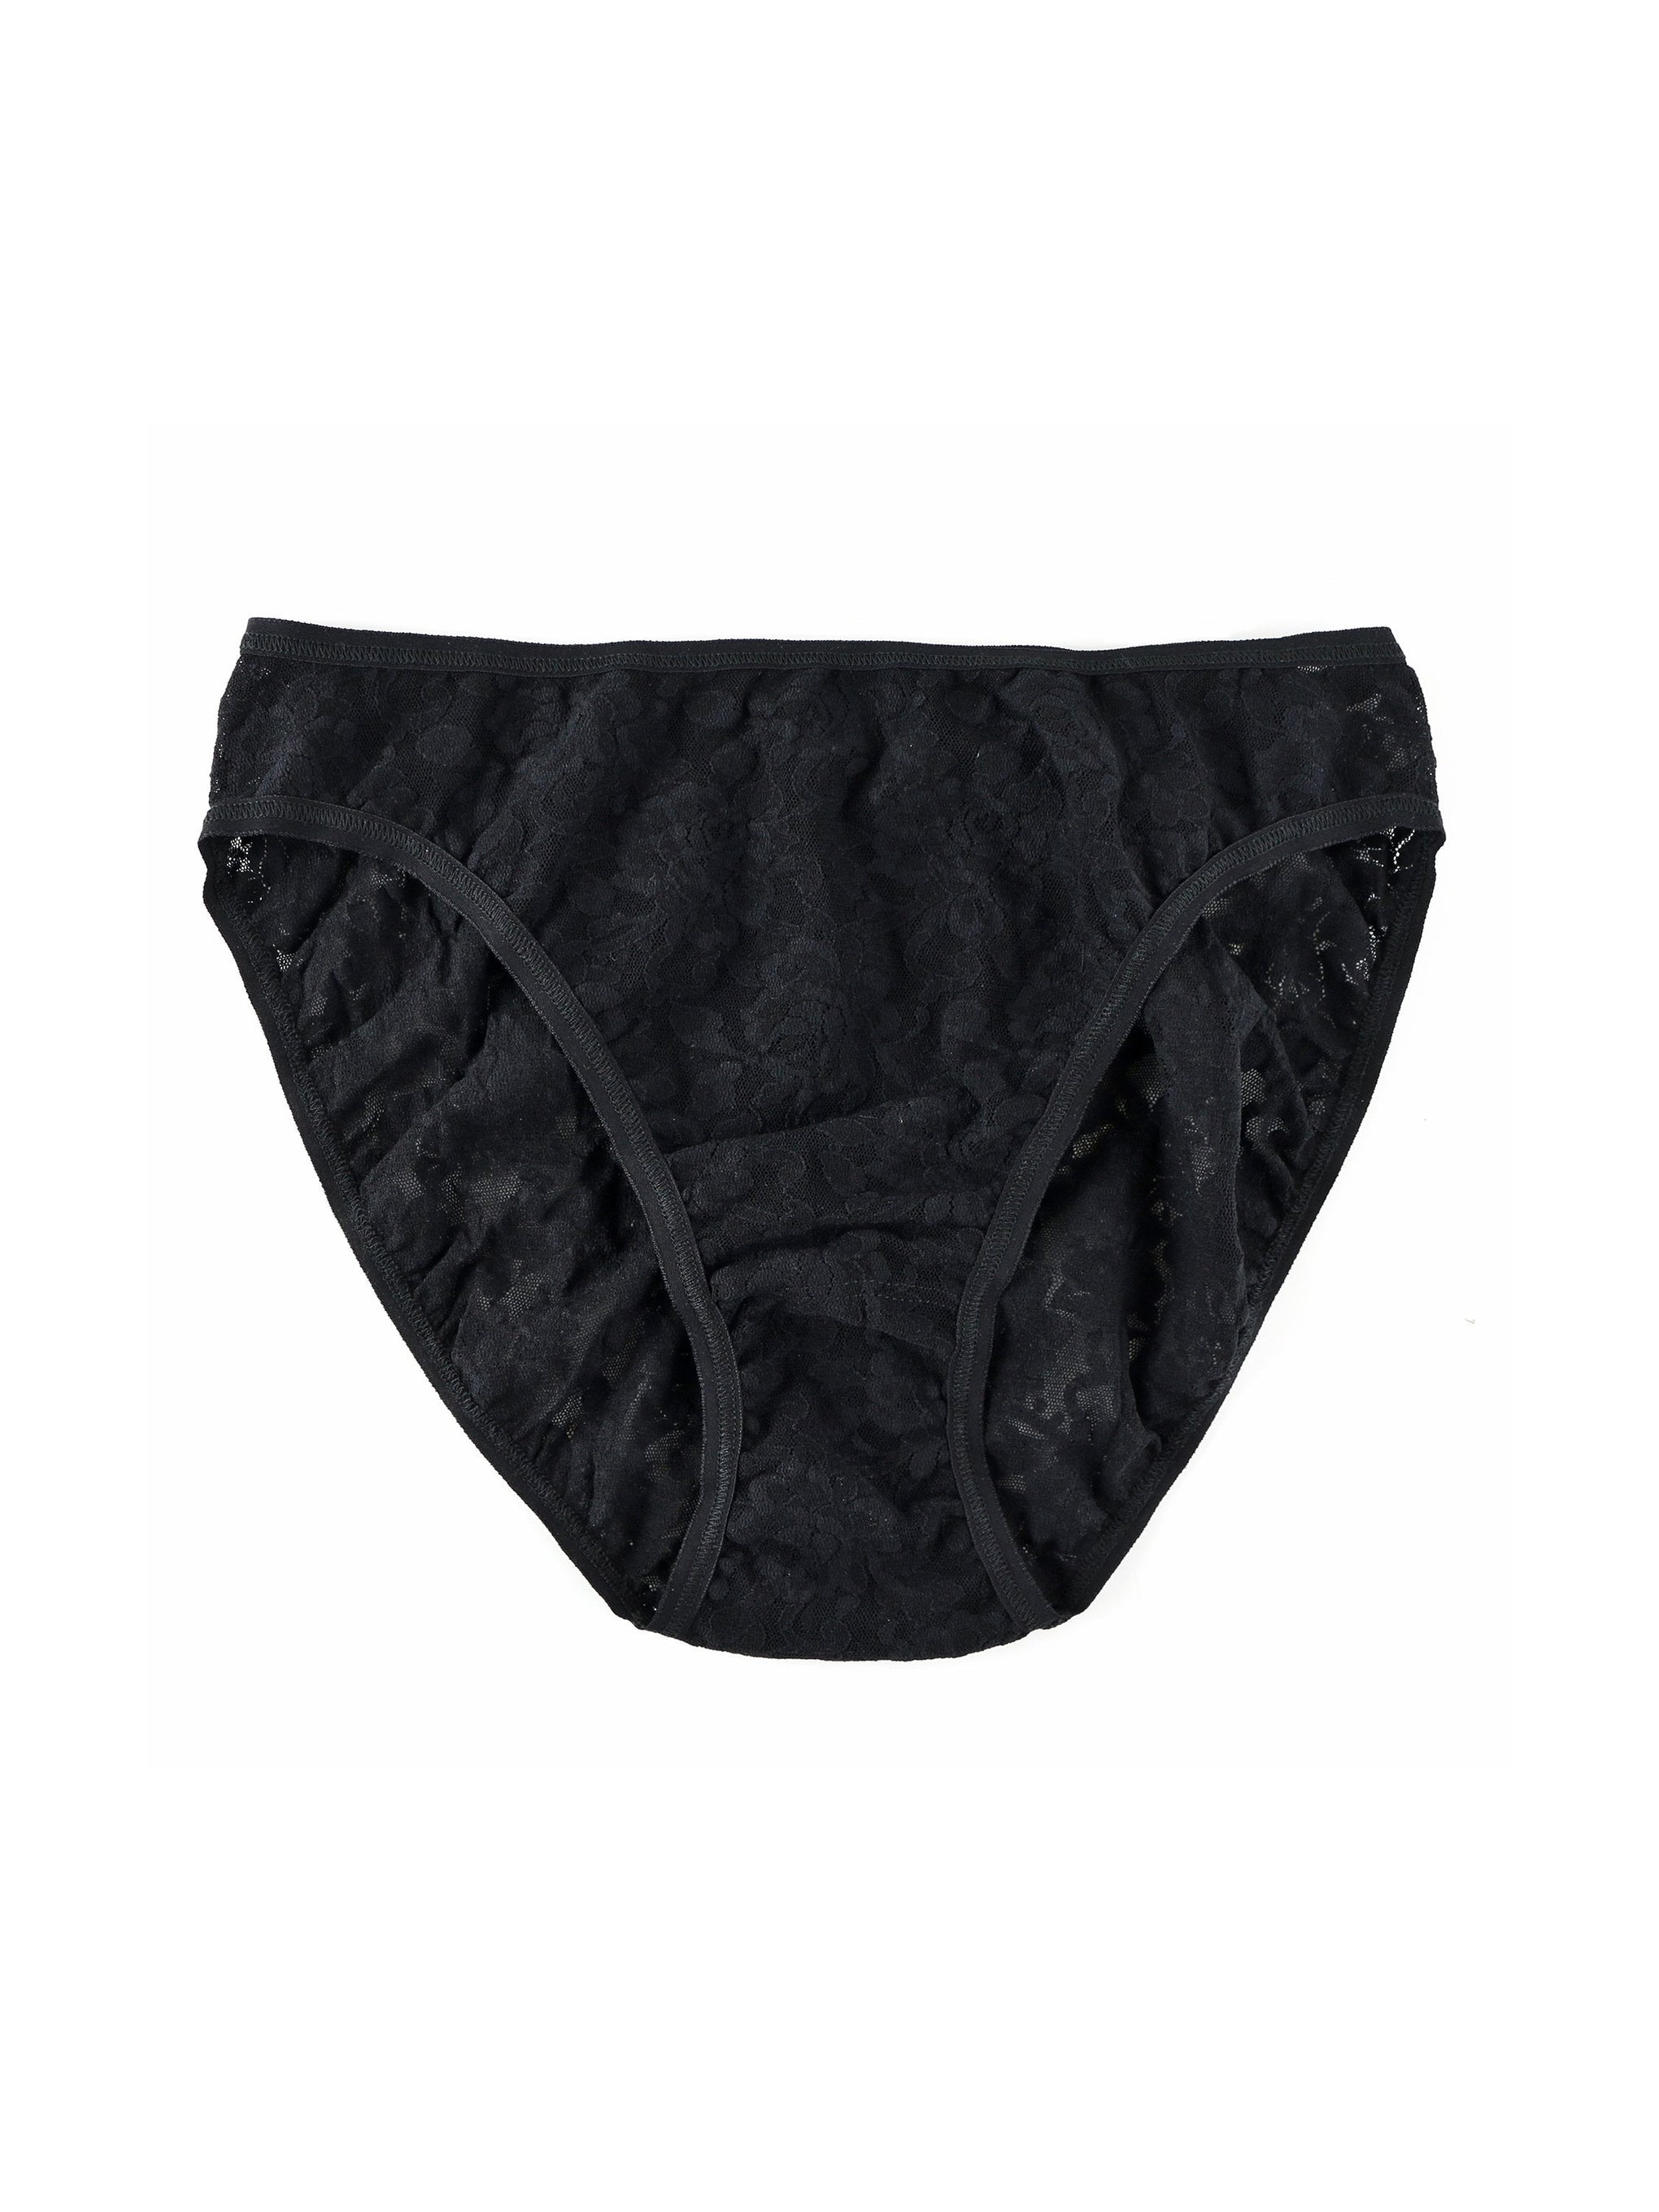 Bretelle Grunge Lace Panty in Black FINAL SALE (50% Off) - Busted